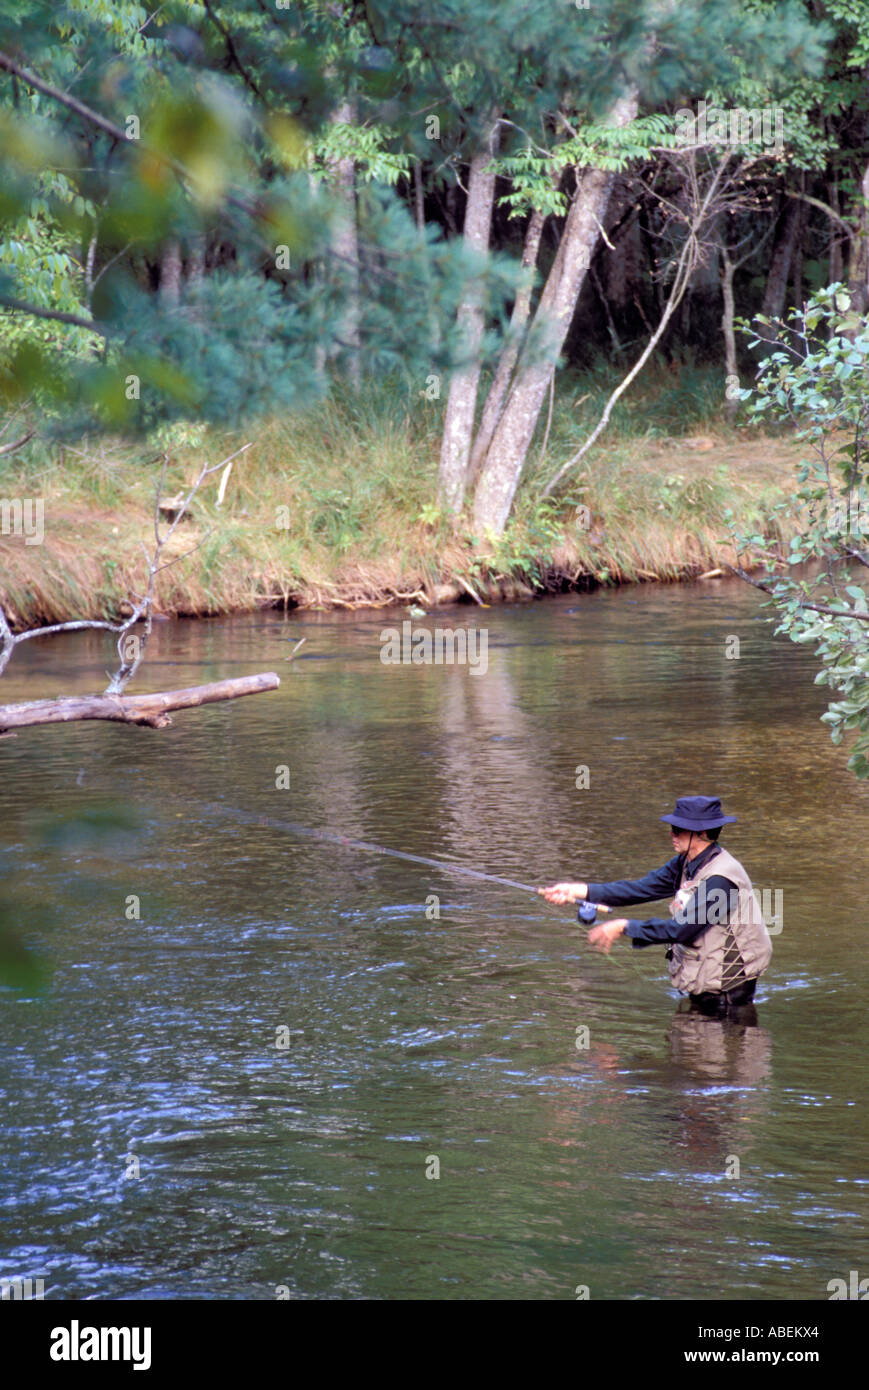 Fly fishing in river Stock Photo